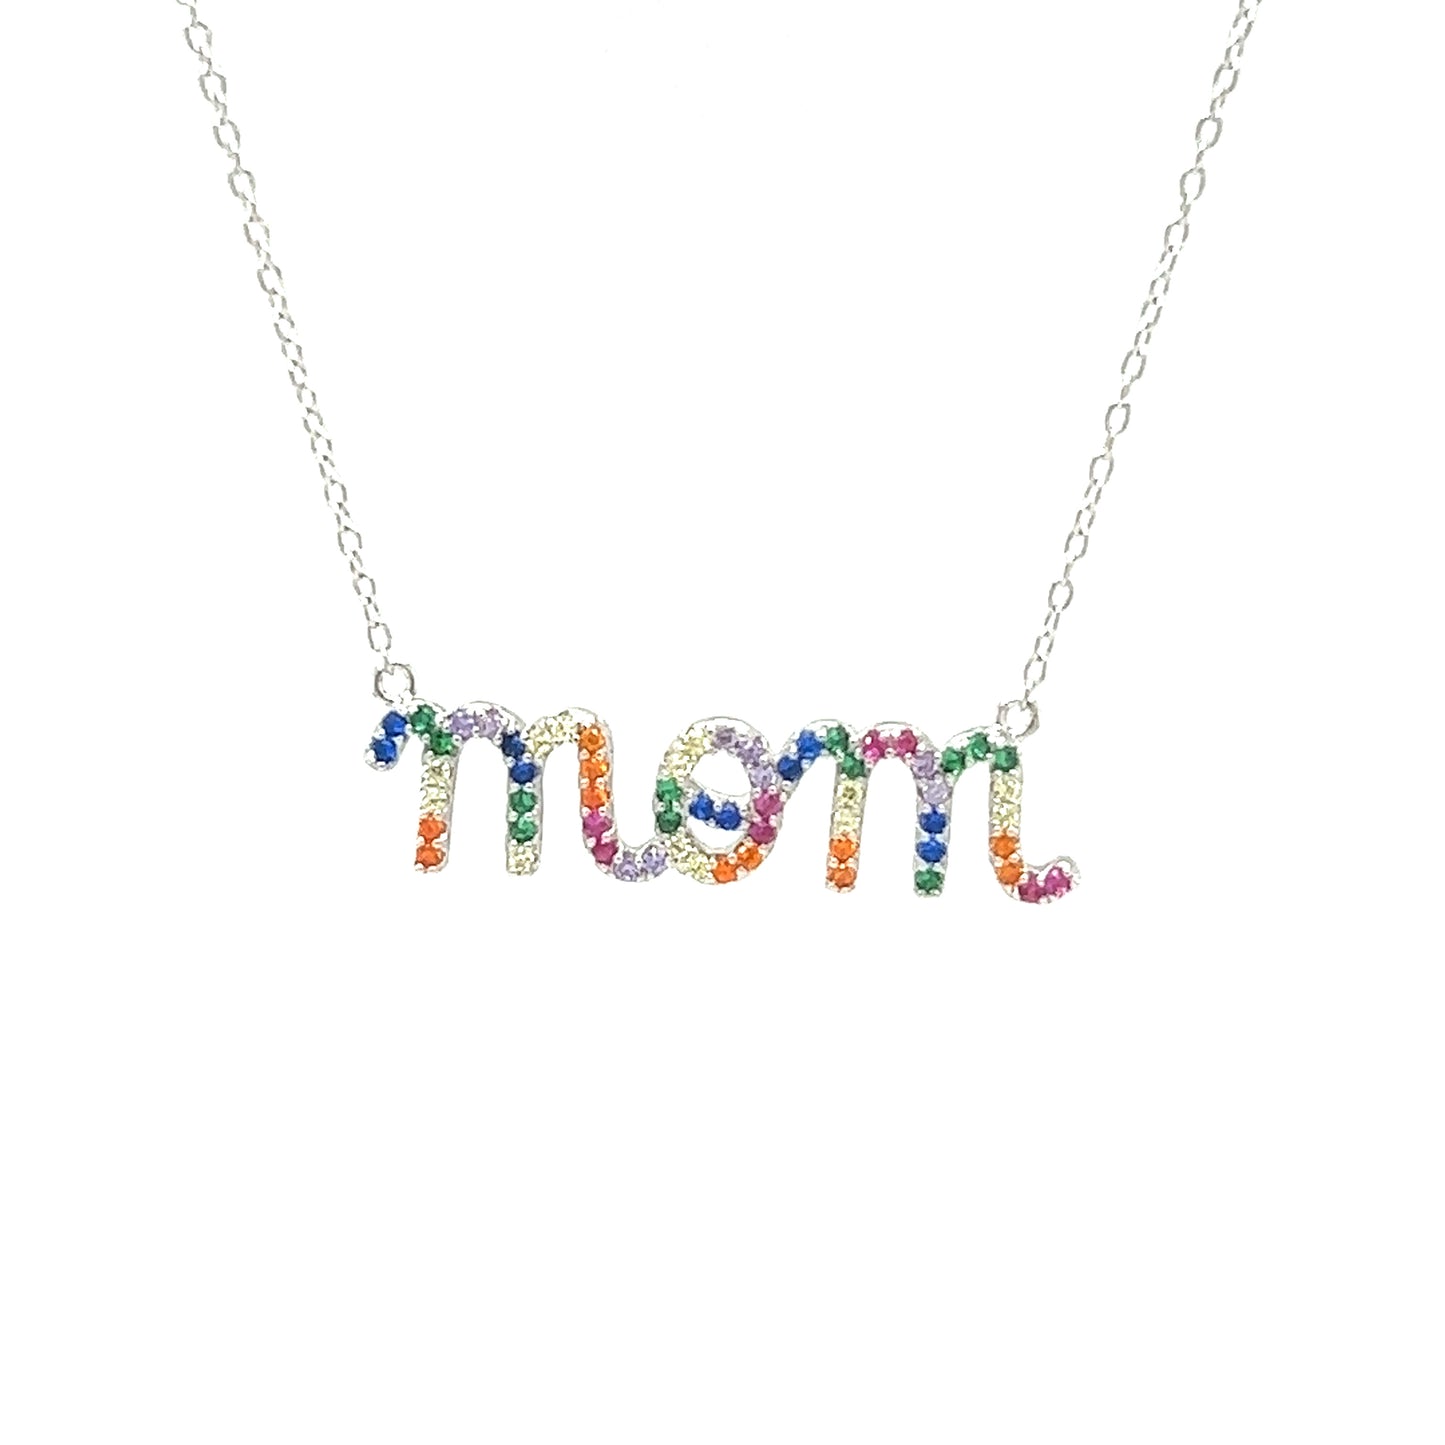 A Super Silver contemporary Mom And Mama Necklace featuring the word "mom" in rainbow cubic zirconia stones on a silver chain.